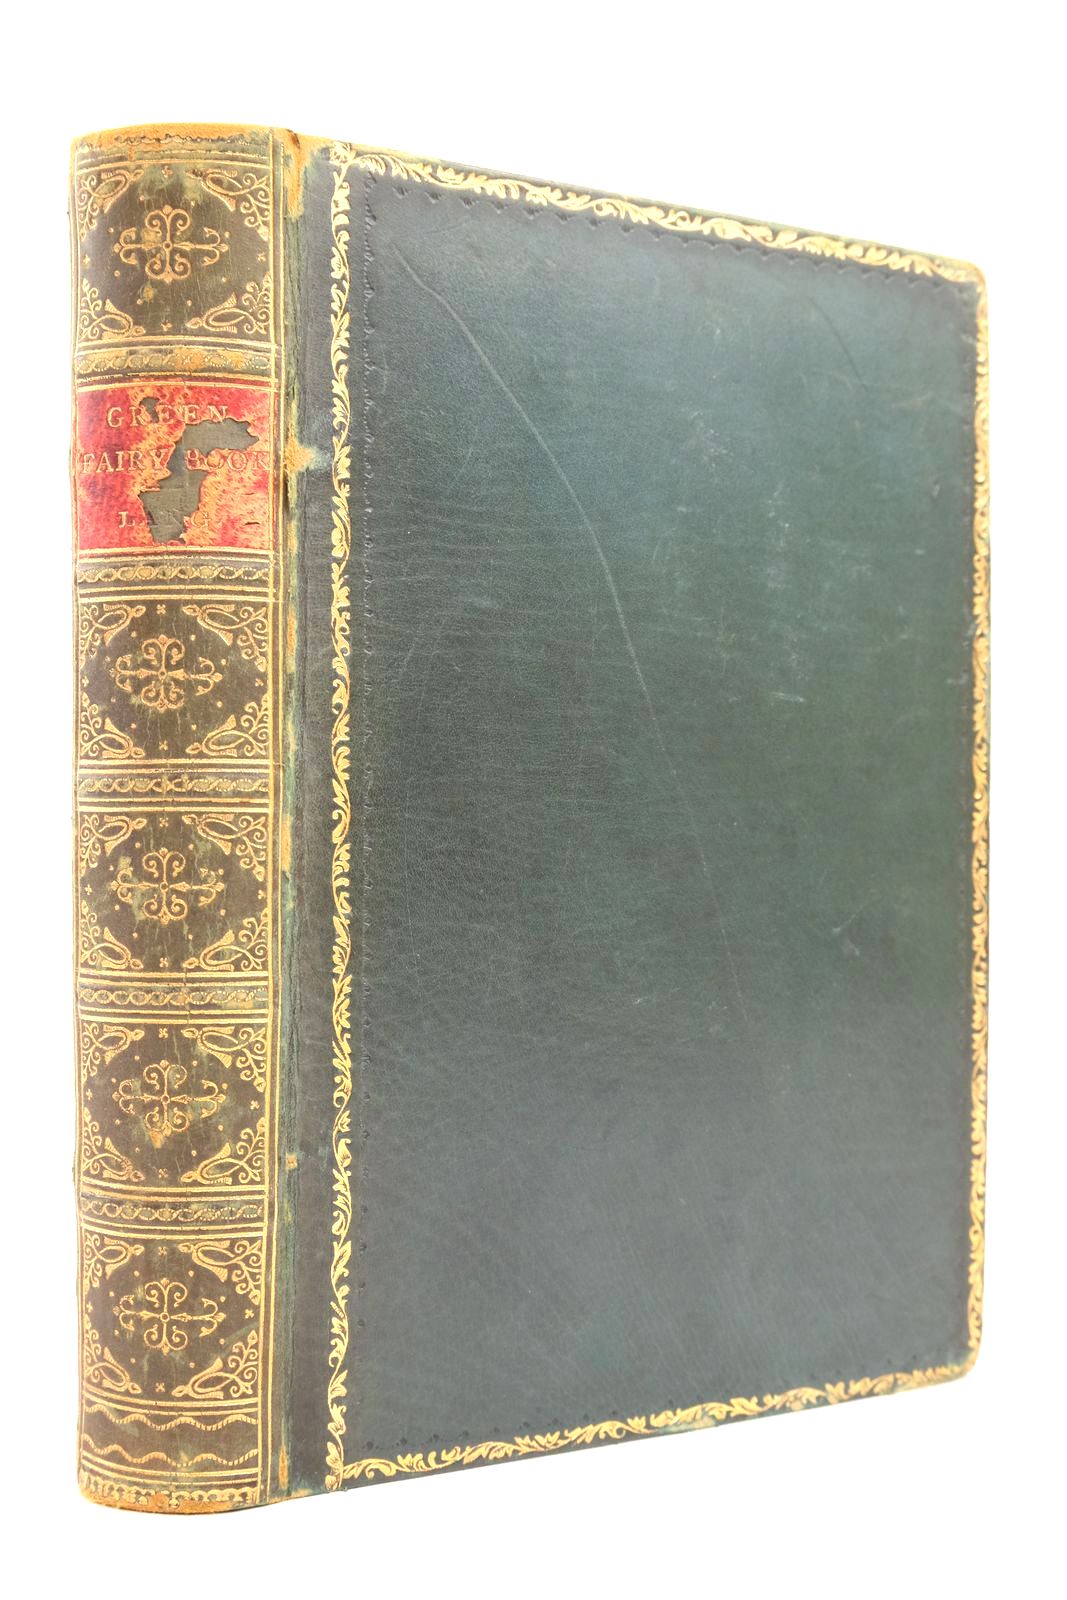 Photo of THE GREEN FAIRY BOOK written by Lang, Andrew illustrated by Ford, H.J. published by Longmans, Green & Co. (STOCK CODE: 2139414)  for sale by Stella & Rose's Books